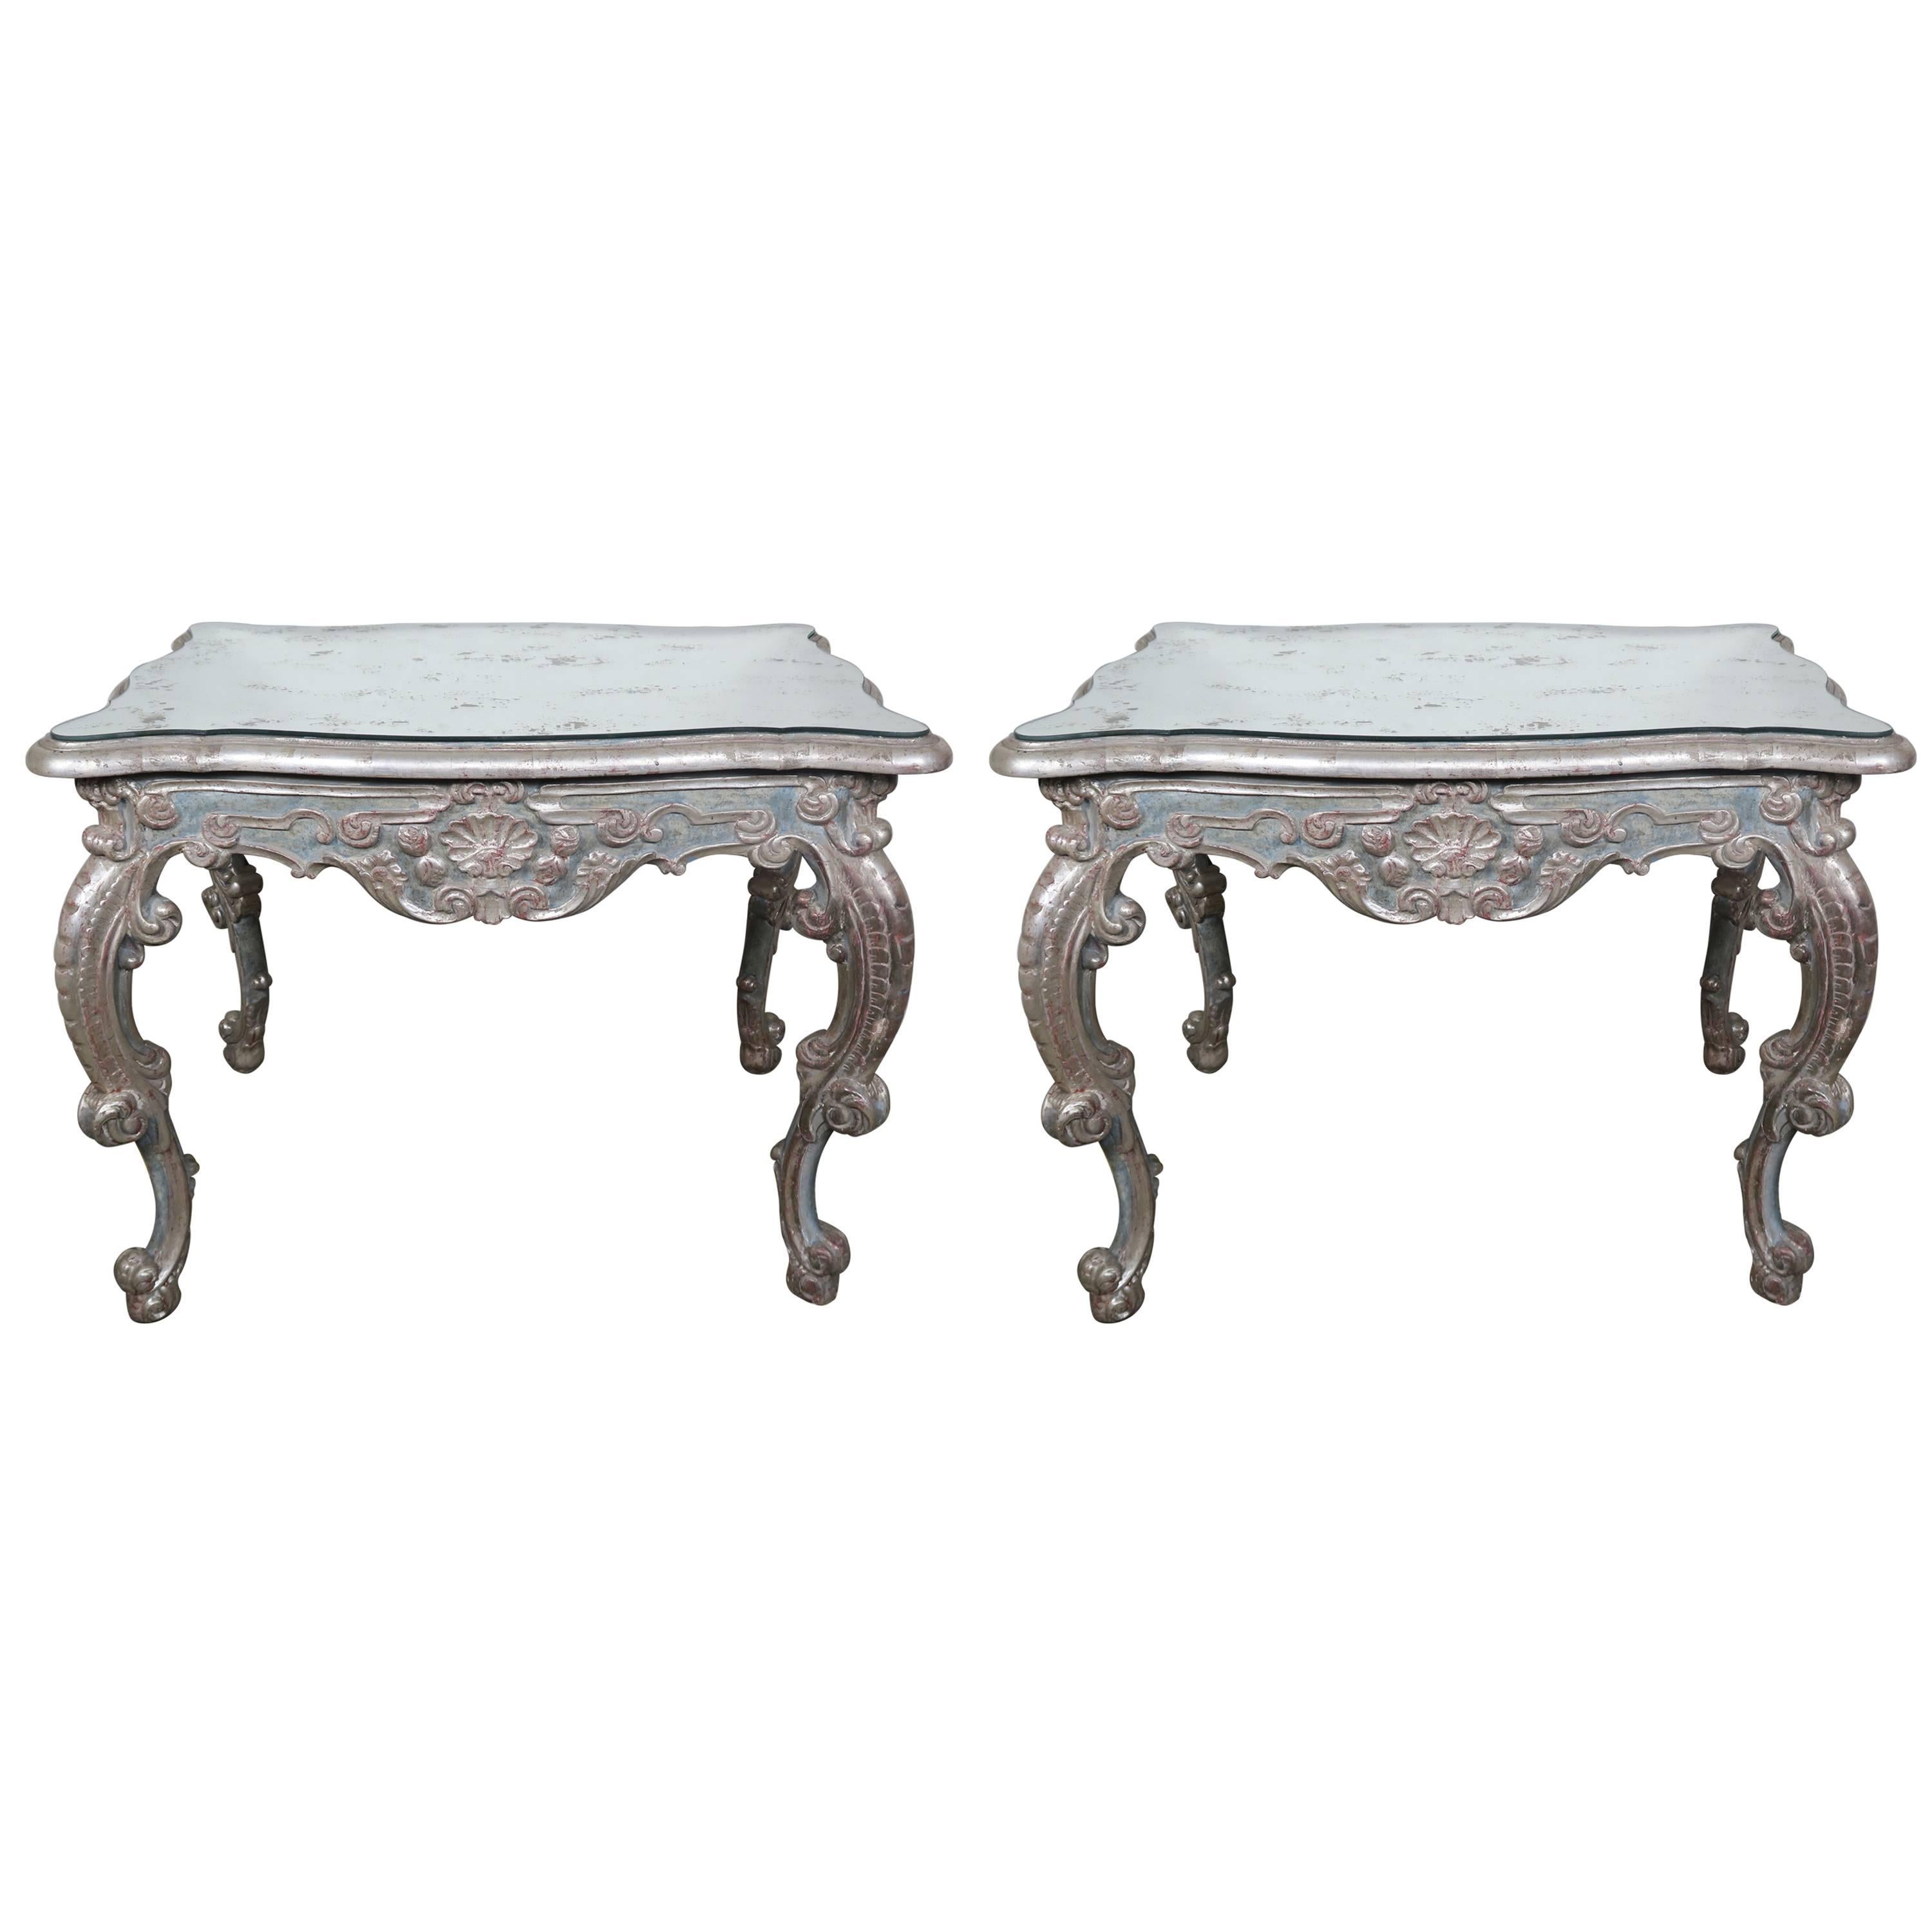 Pair of French Painted and Silver Gilt Tables with Mirrored Tops